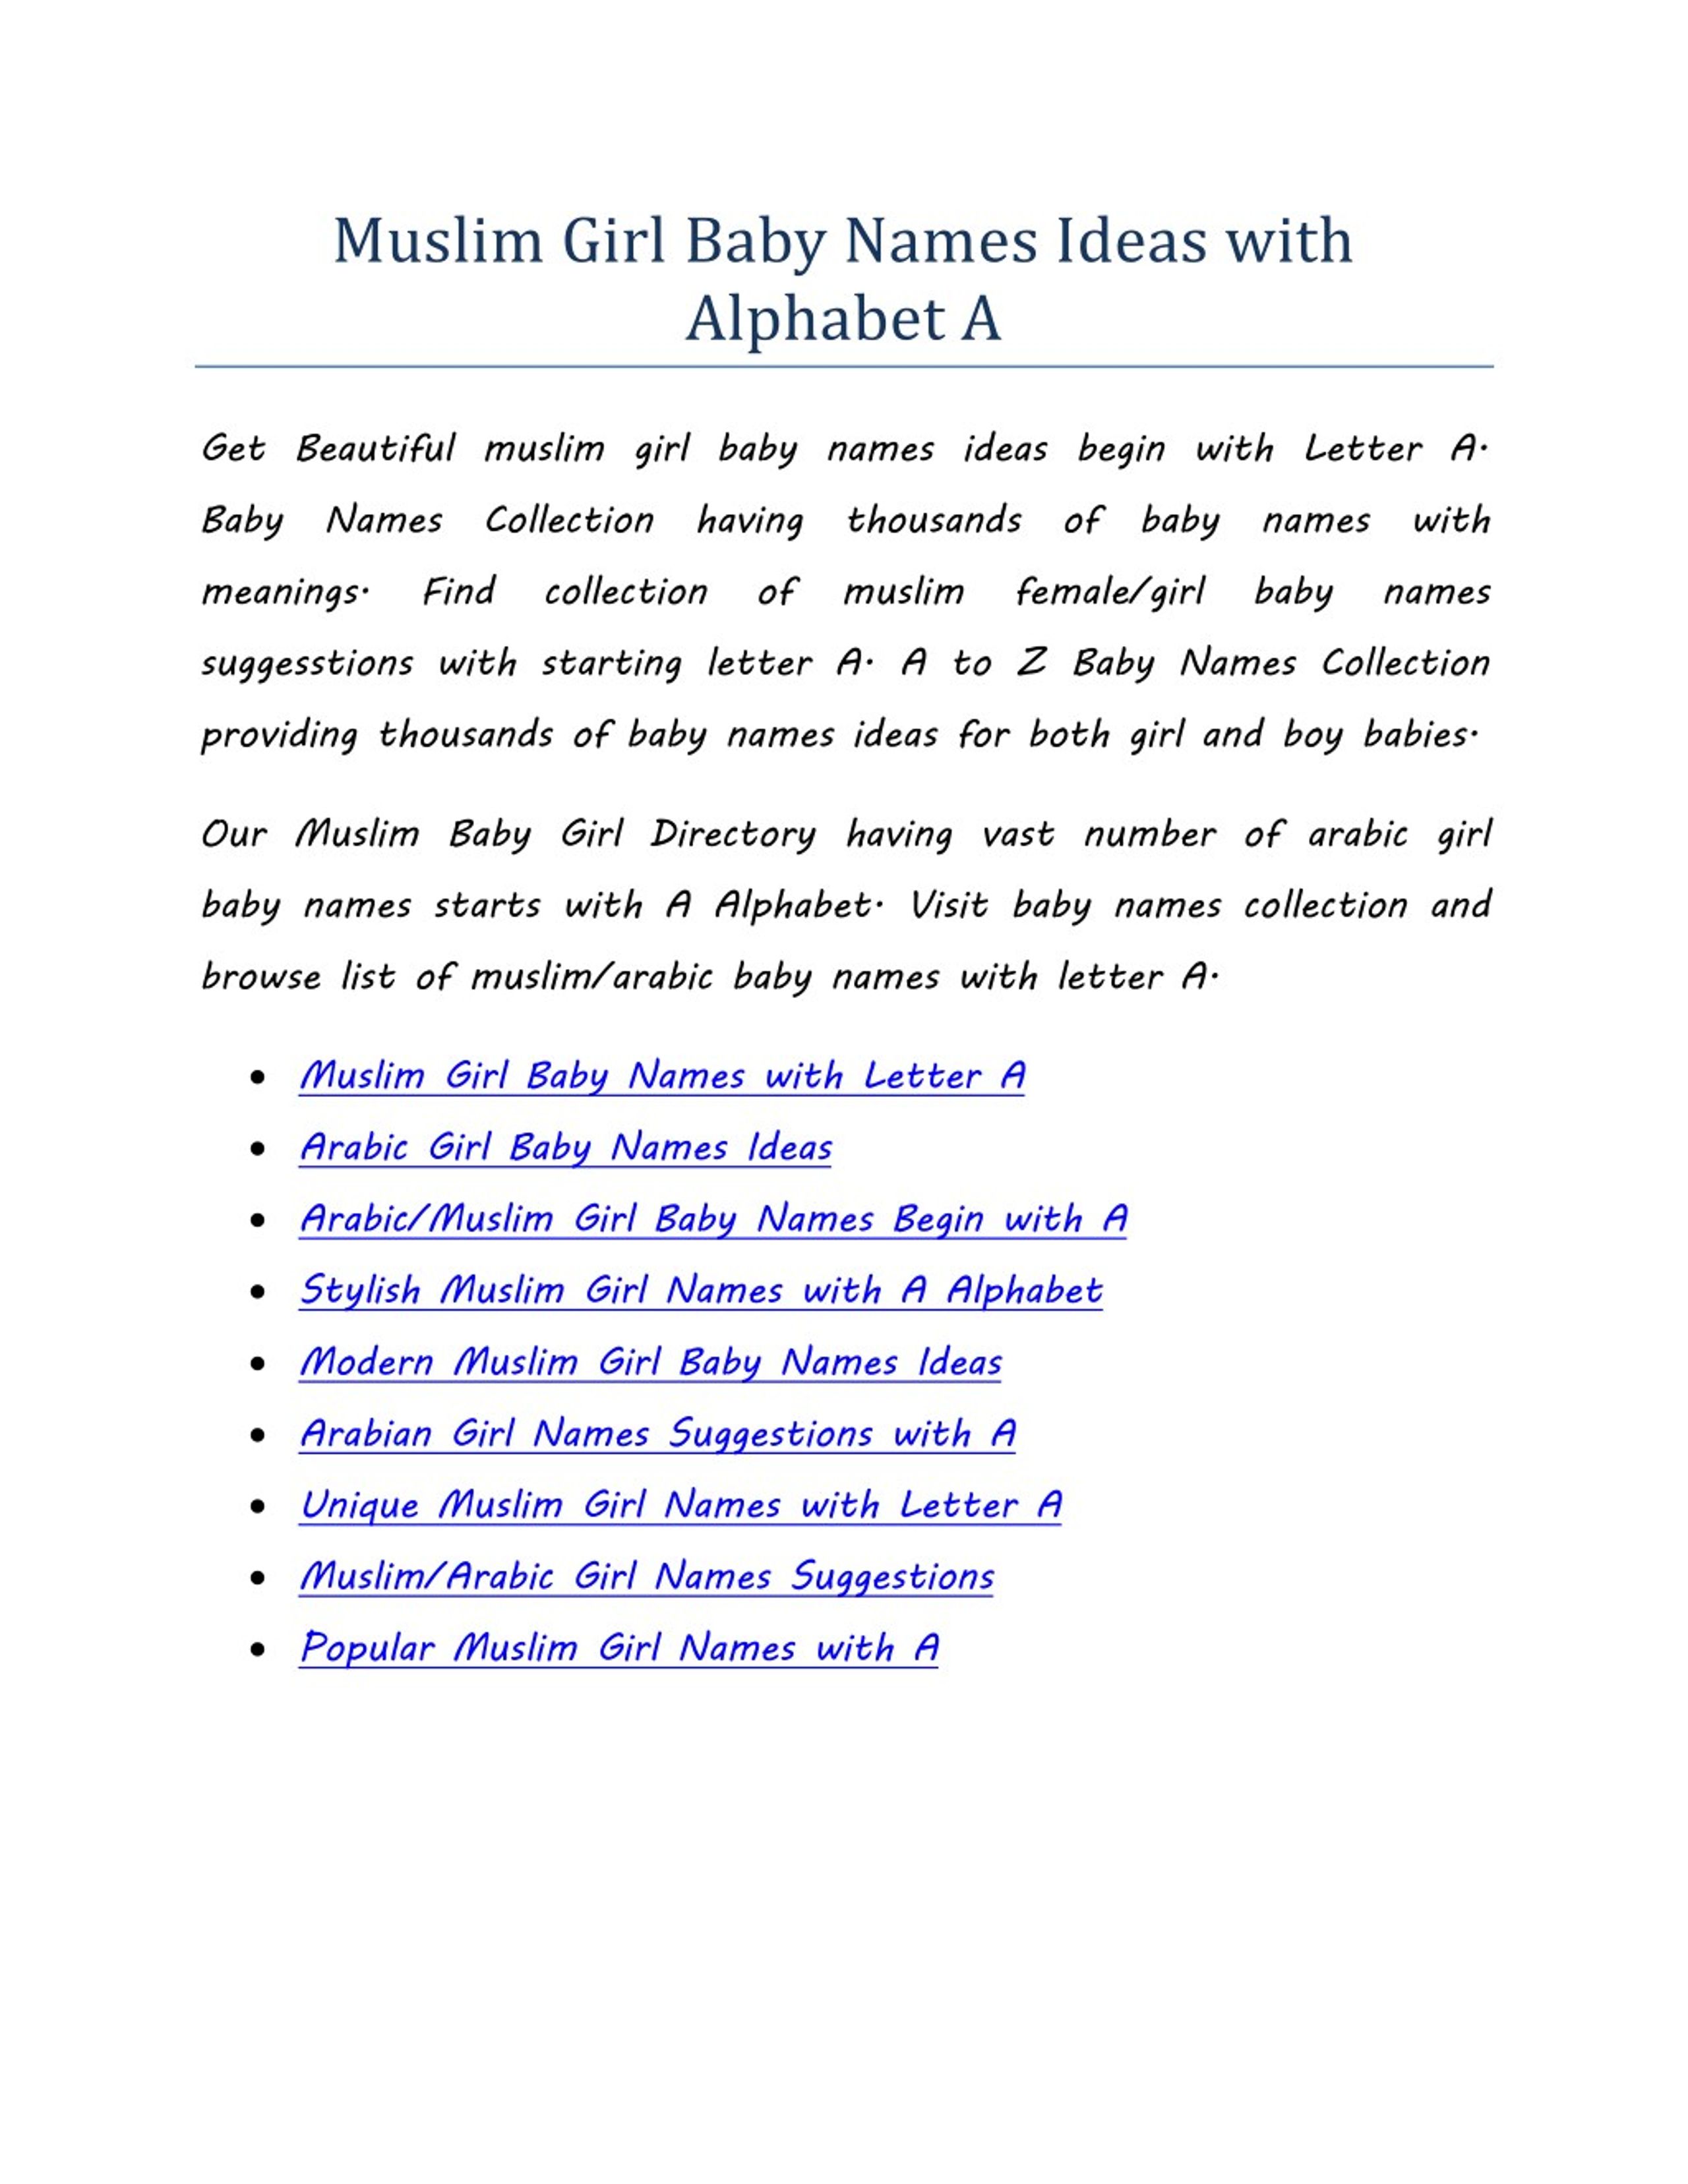 Ppt Muslim Girl Baby Names Ideas With Alphabet A Powerpoint